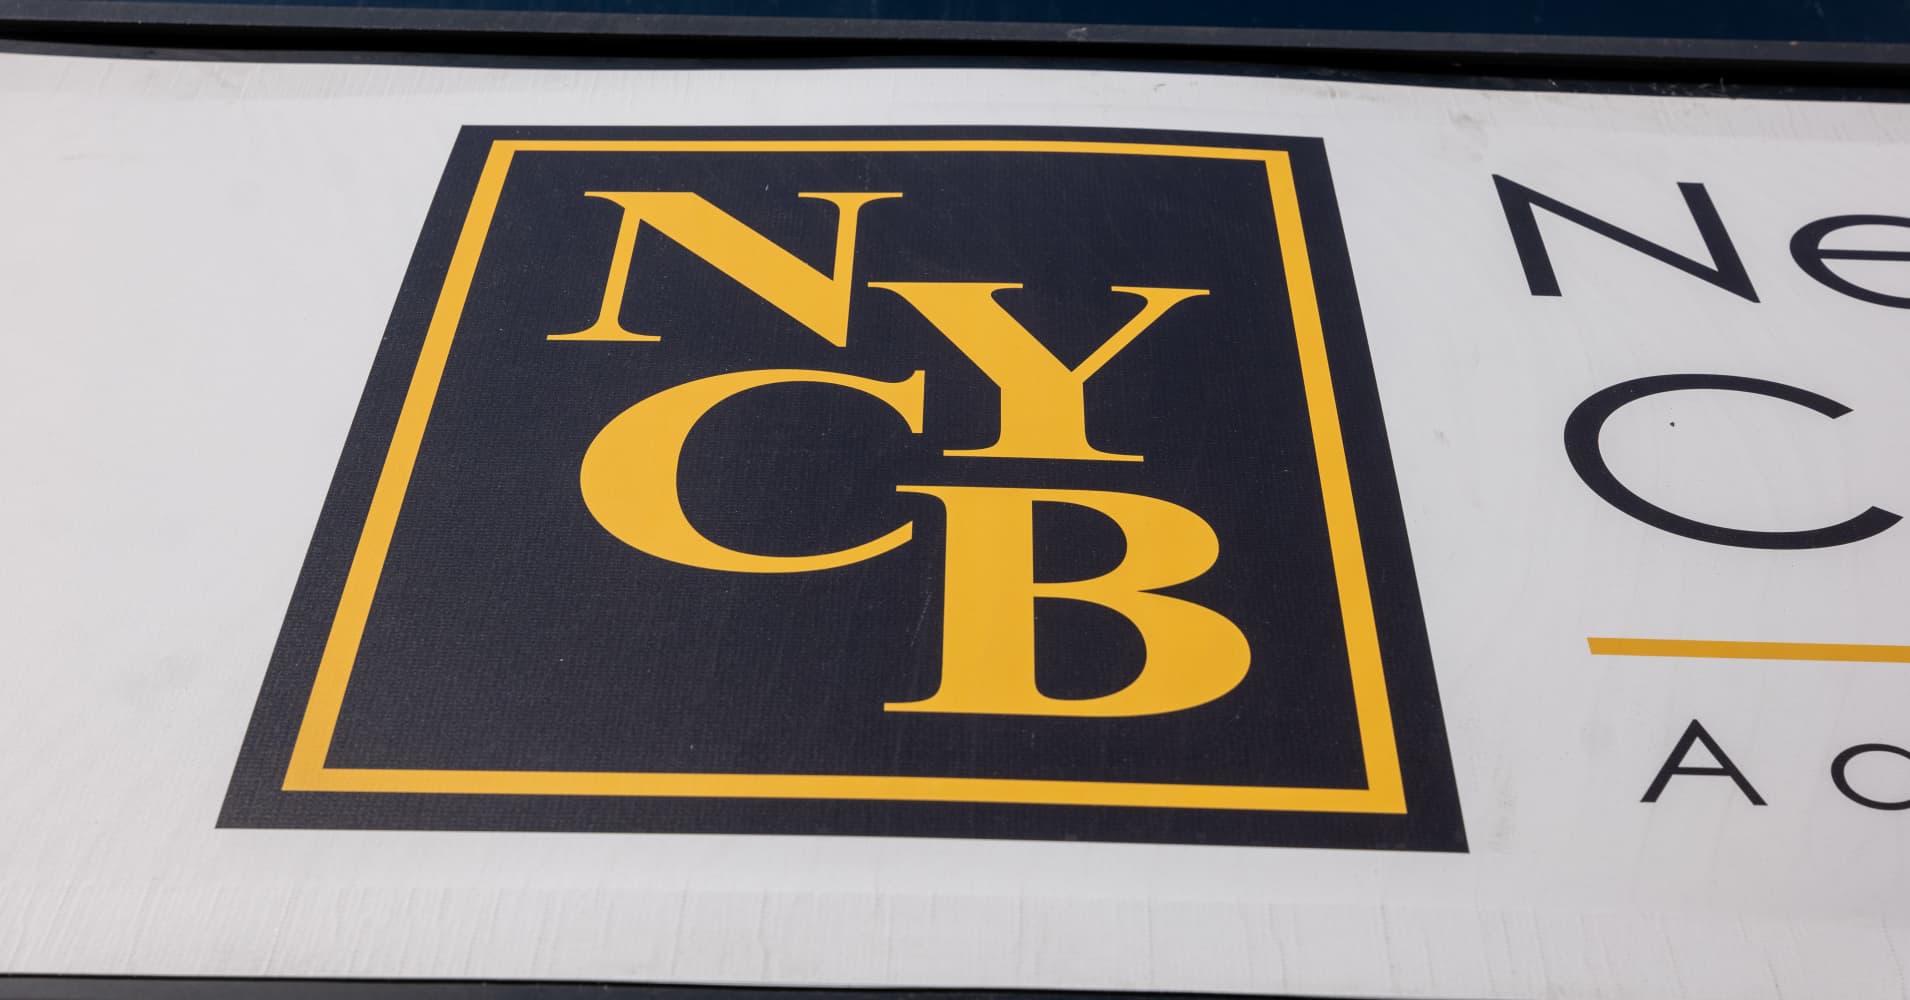 shares of nycb fall 18% after bank discloses 'internal controls' issue, ceo change